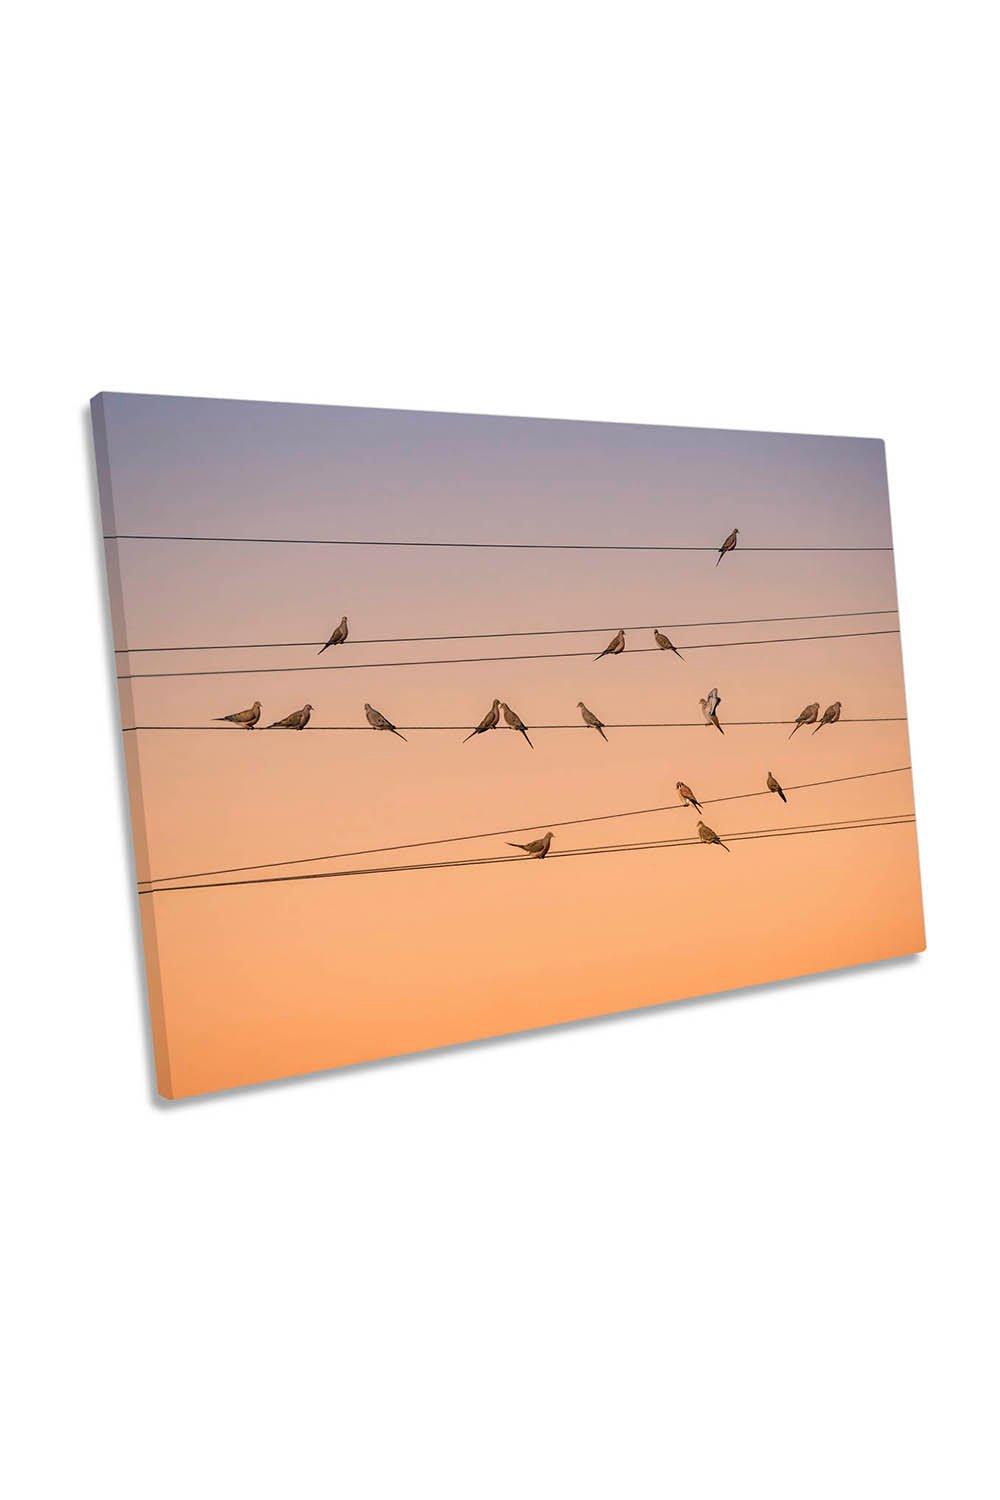 Music of Light Birds on a Wire Sunset Canvas Wall Art Picture Print